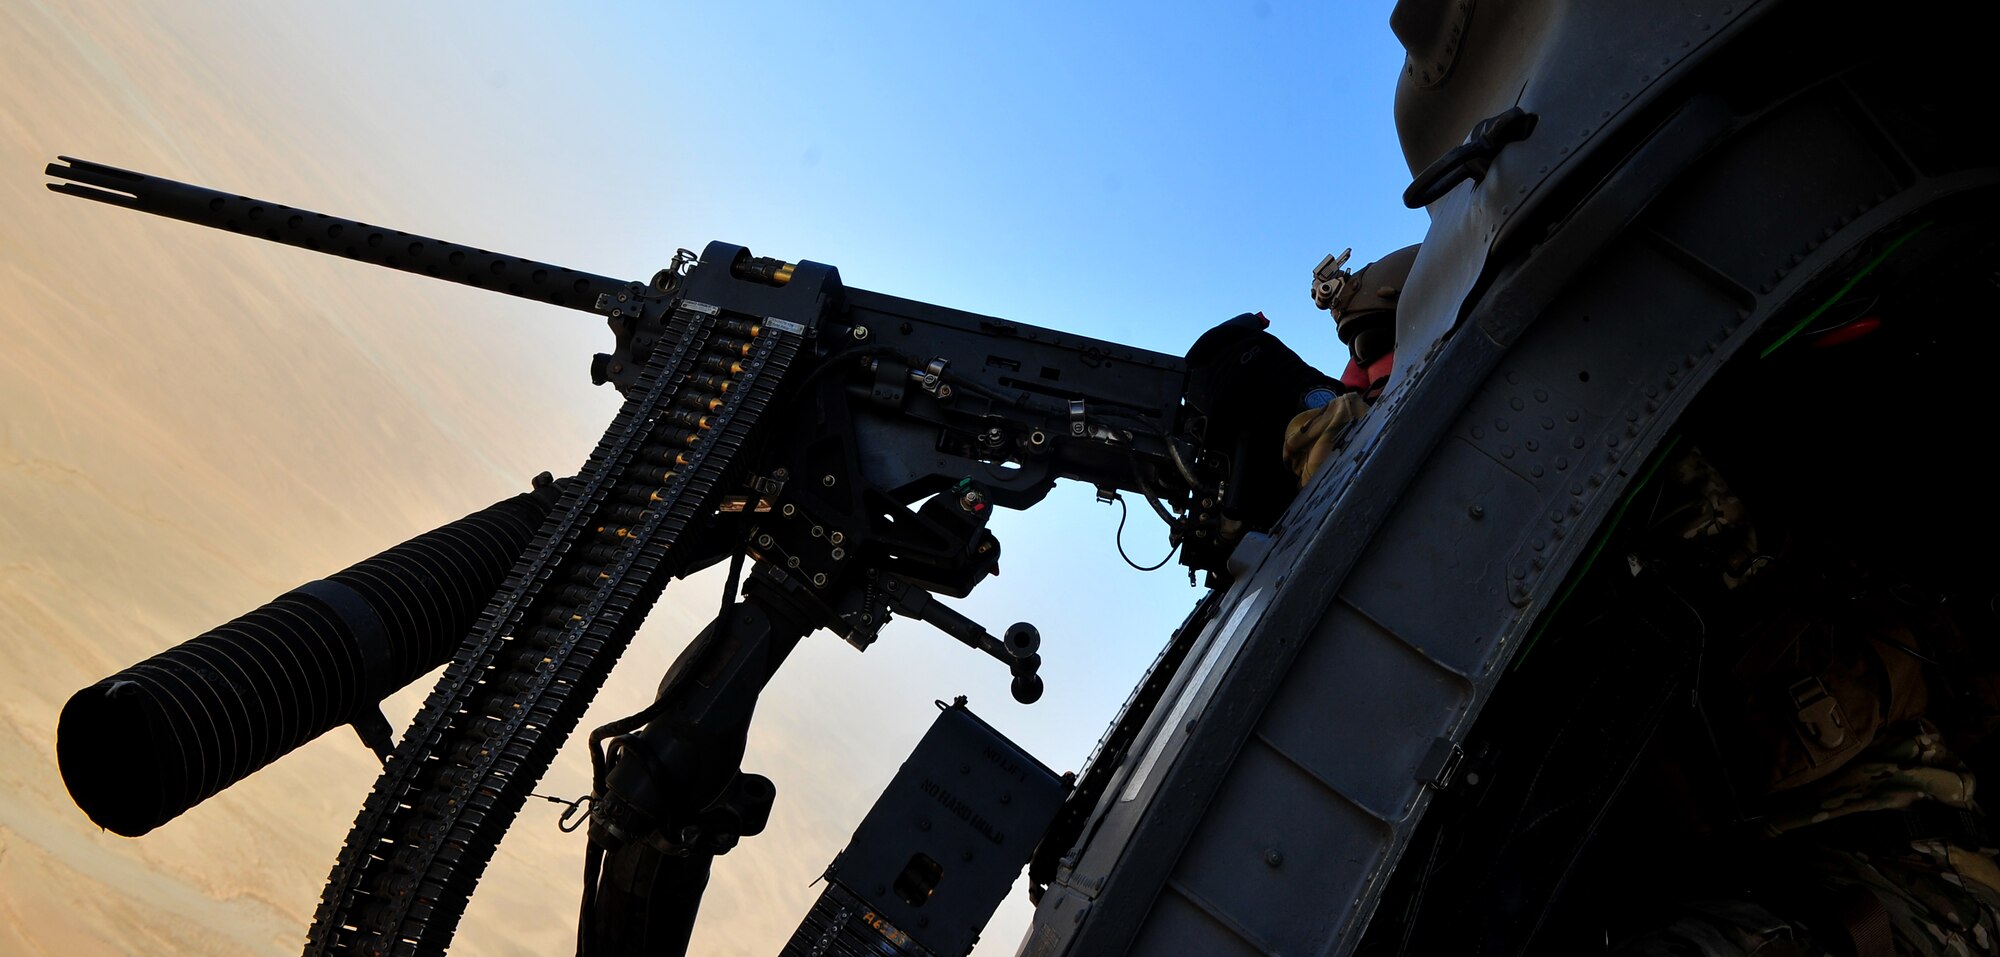 CAMP BASTION, Afghanistan -- An aircrew member from the 26th Expeditionary Rescue Squadron mans the 50 caliber machine gun mounted to a HH-60G Pave Hawk helicopter. The 26th ERQS compliments their traditional personnel recovery mission with medical evacuation operations in Afghanistan’s Regional Command Southwest. (U.S. Air Force photo by Senior Airman Tyler Placie)